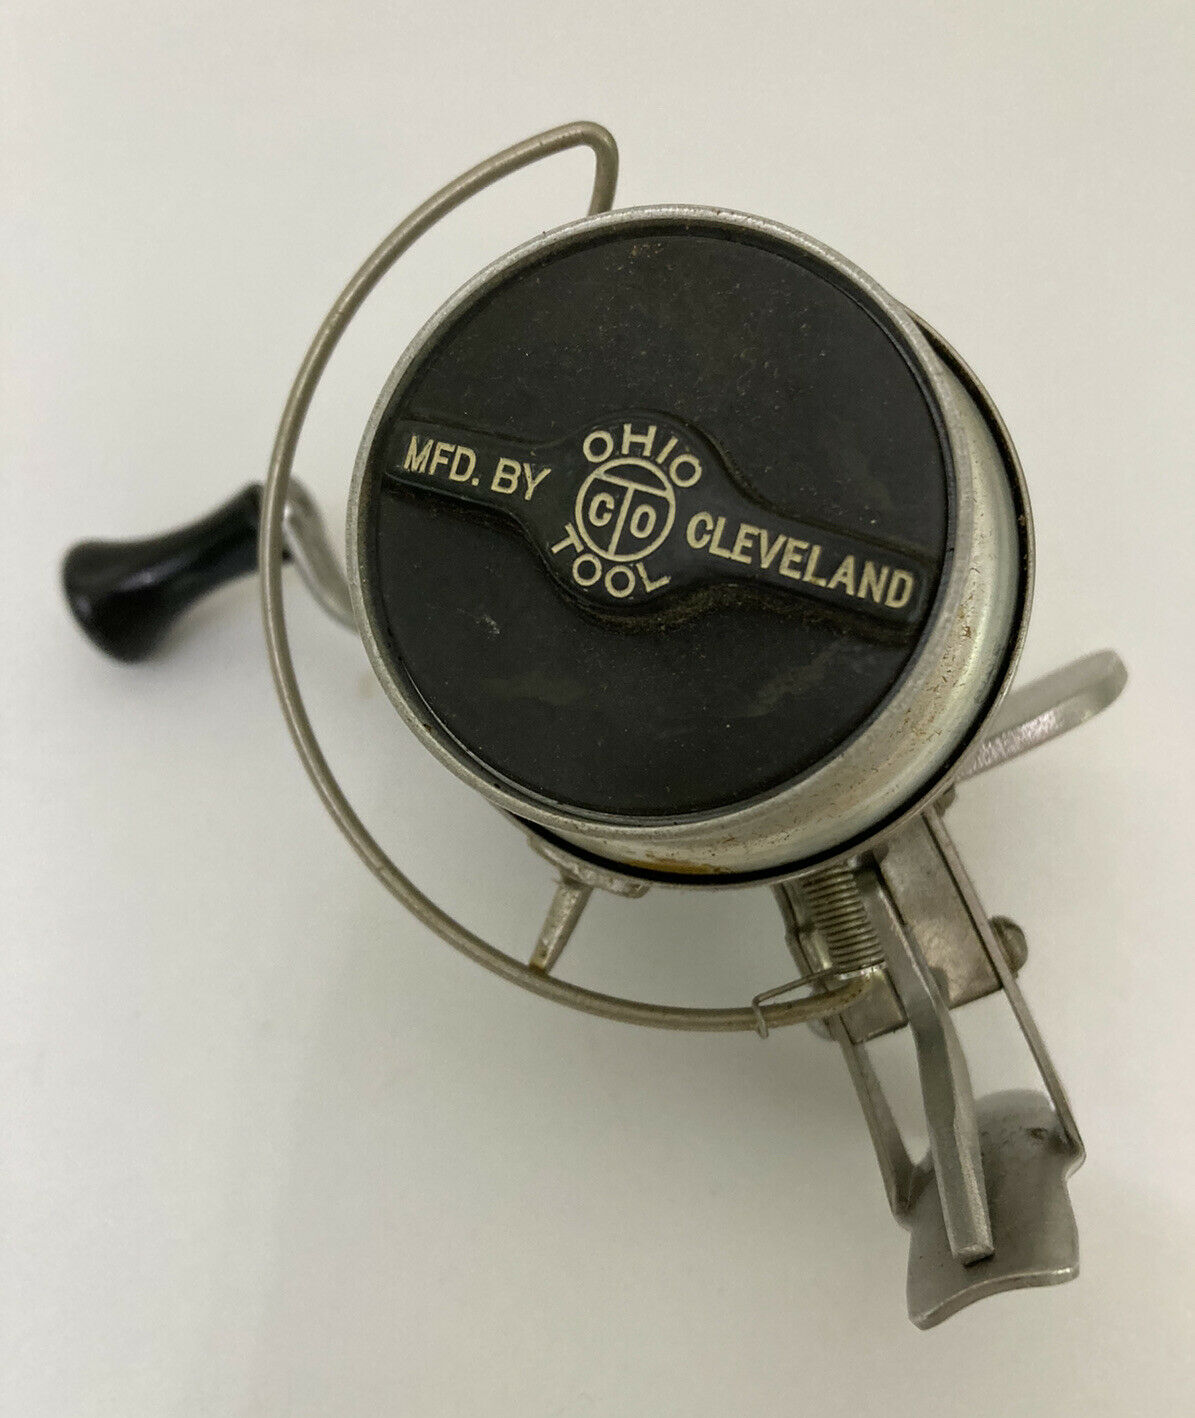 Vintage Ohio Tool Co Fishing Reel. Cleveland OH.